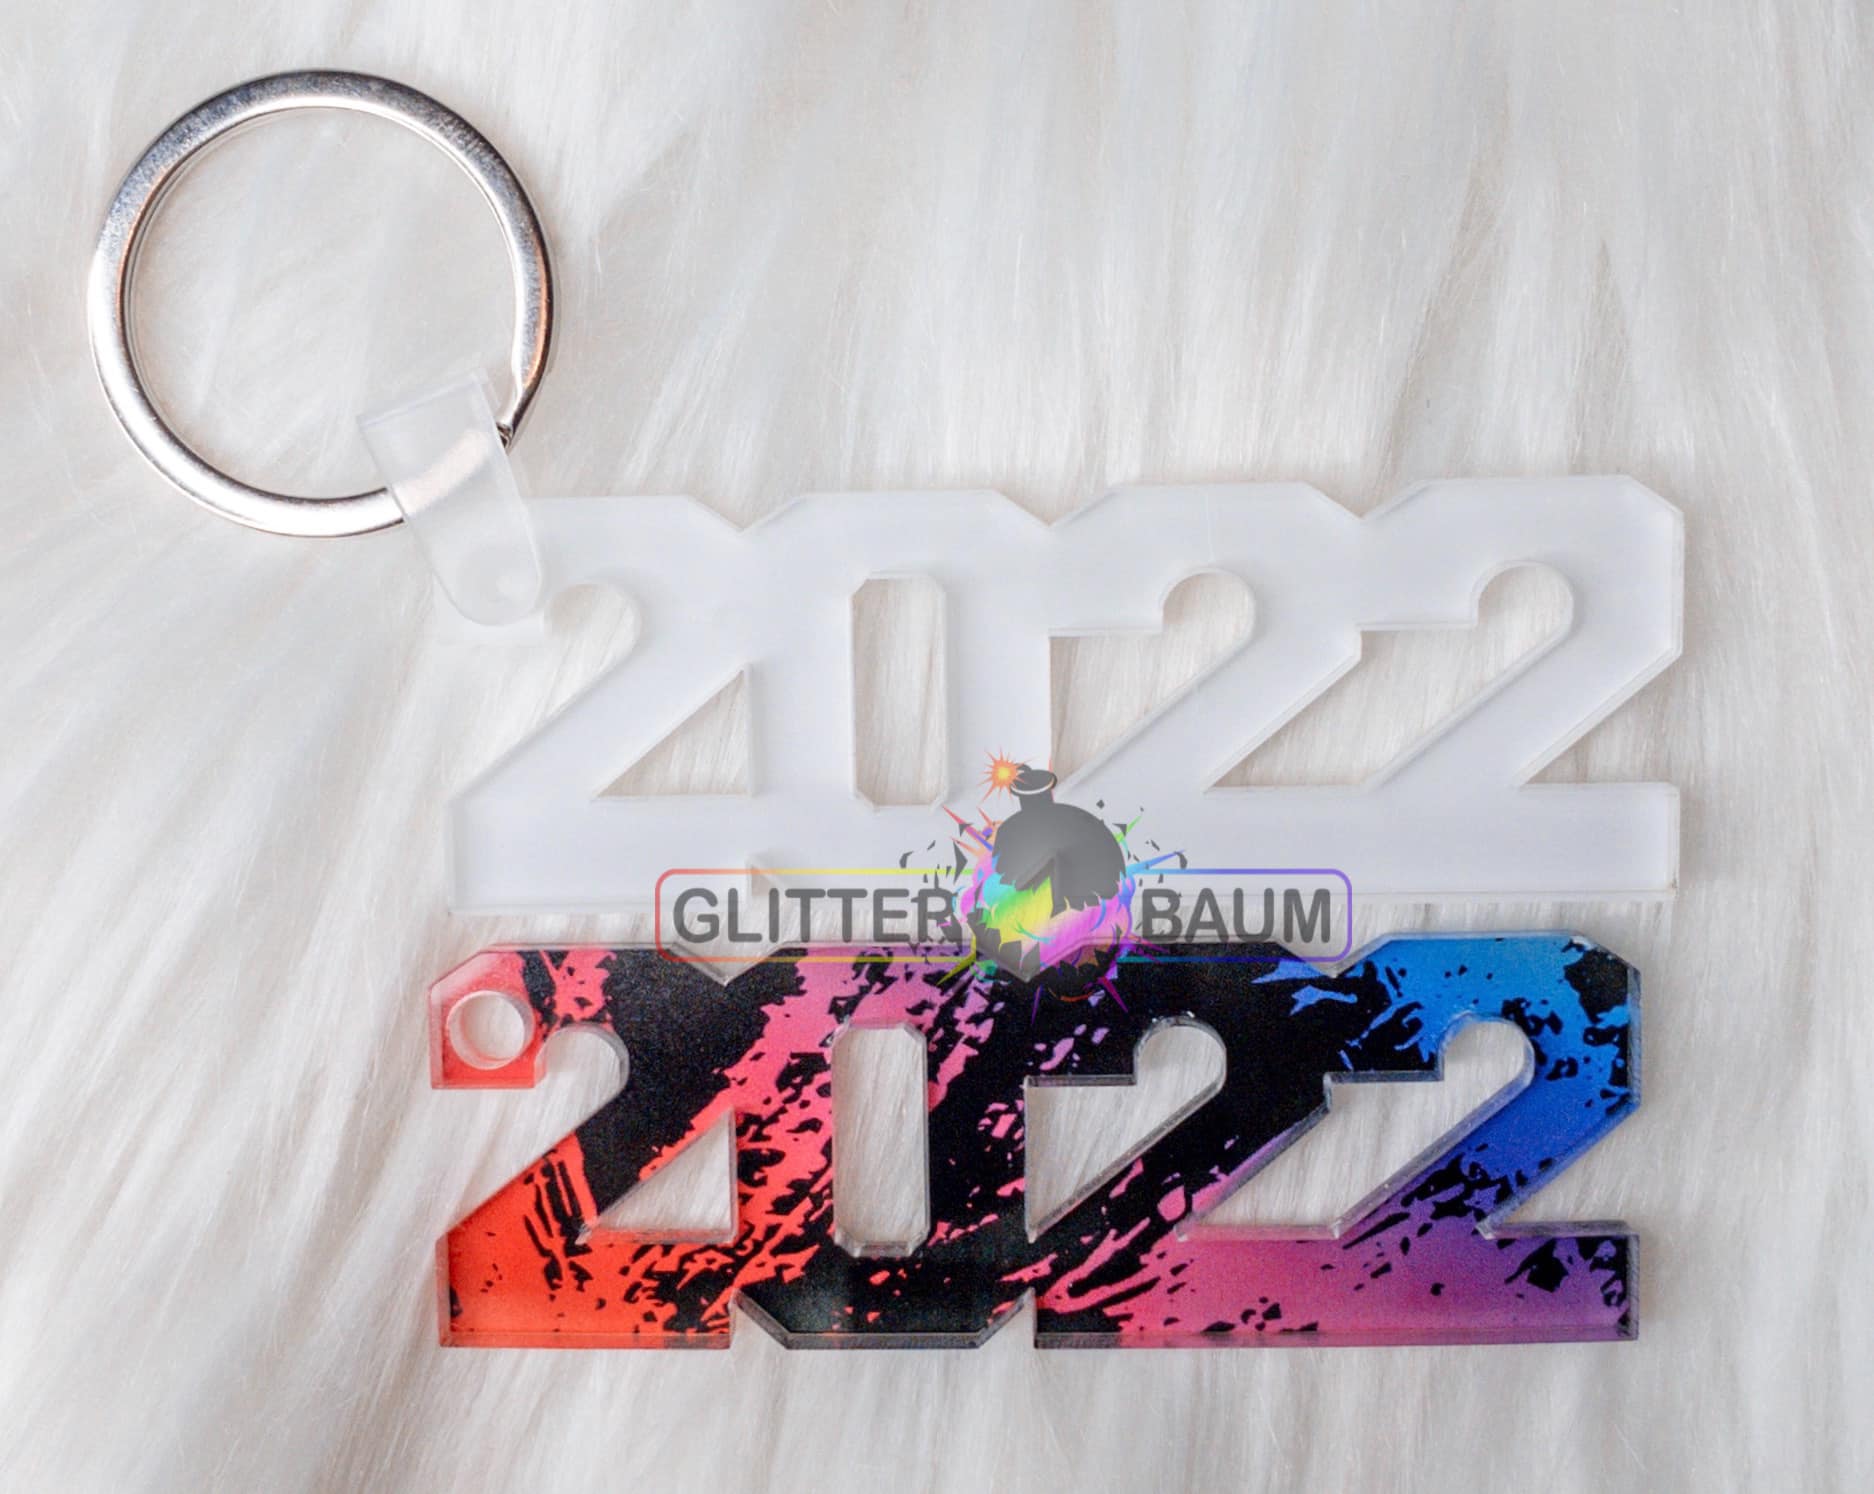 15 Styles Of Onesided Sublimation Acrylic Blank Acrylic Keychains Perfect  Party Favors And Heat Transfer Ornaments For Present Giving From  Keychainshop, $0.75